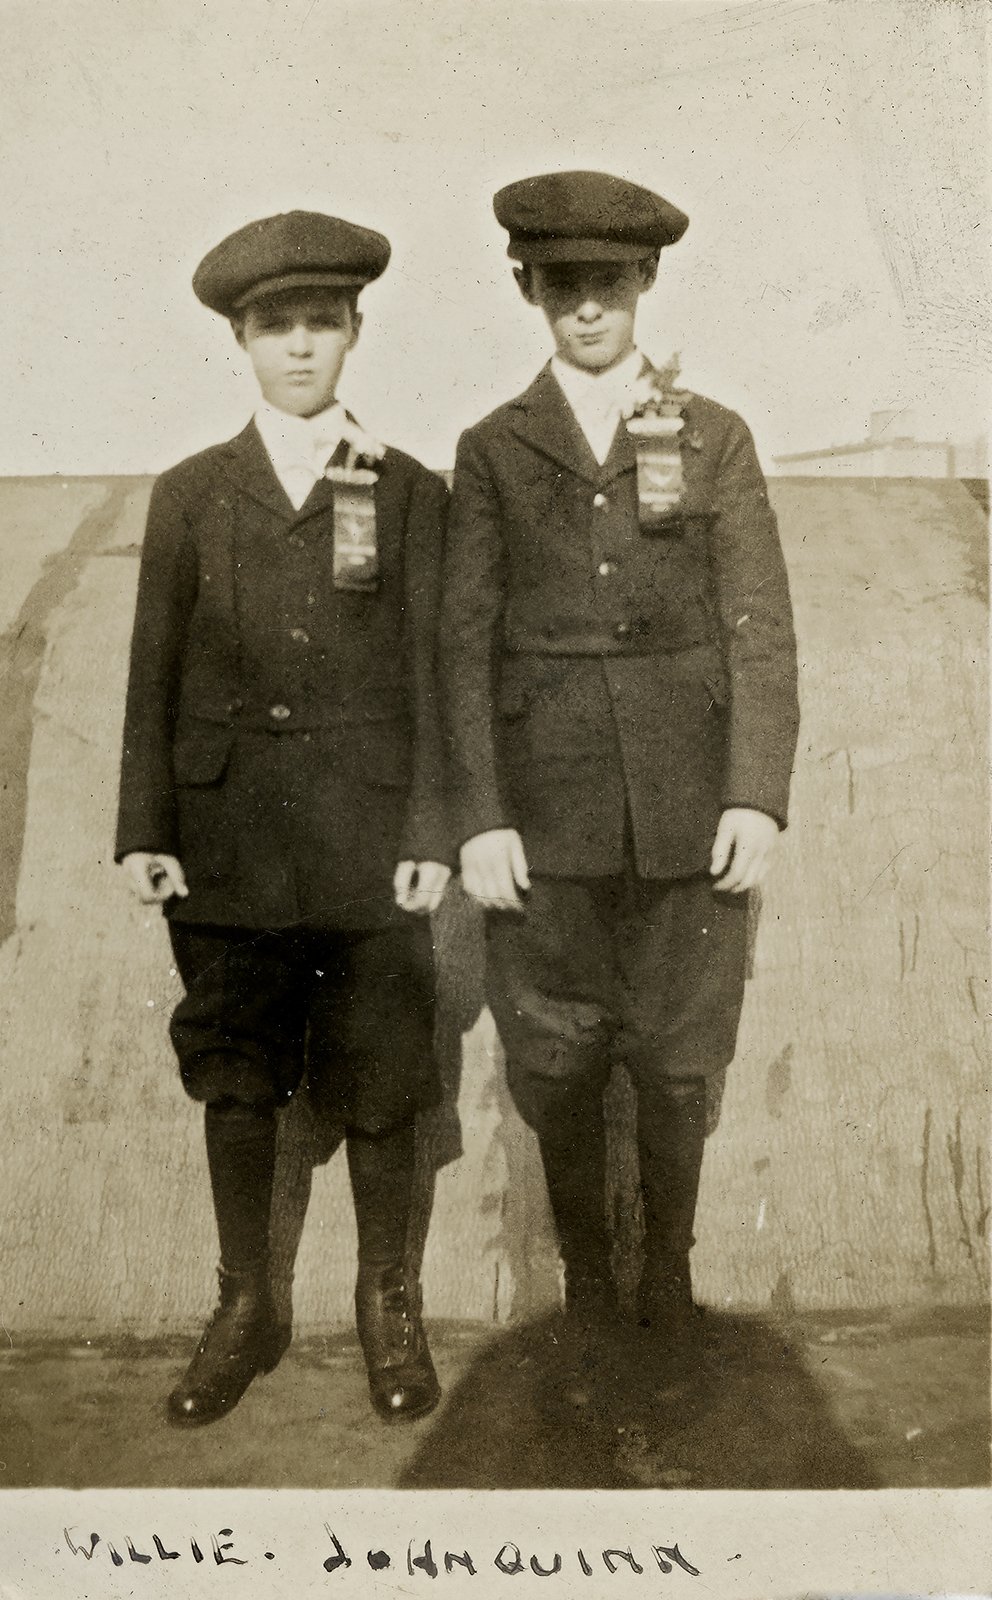 Alice’s father Willy McDermott, left, with his cousin John Quinn, wearing their Confirmation badges, Upper West Side, New York City, c. 1916.